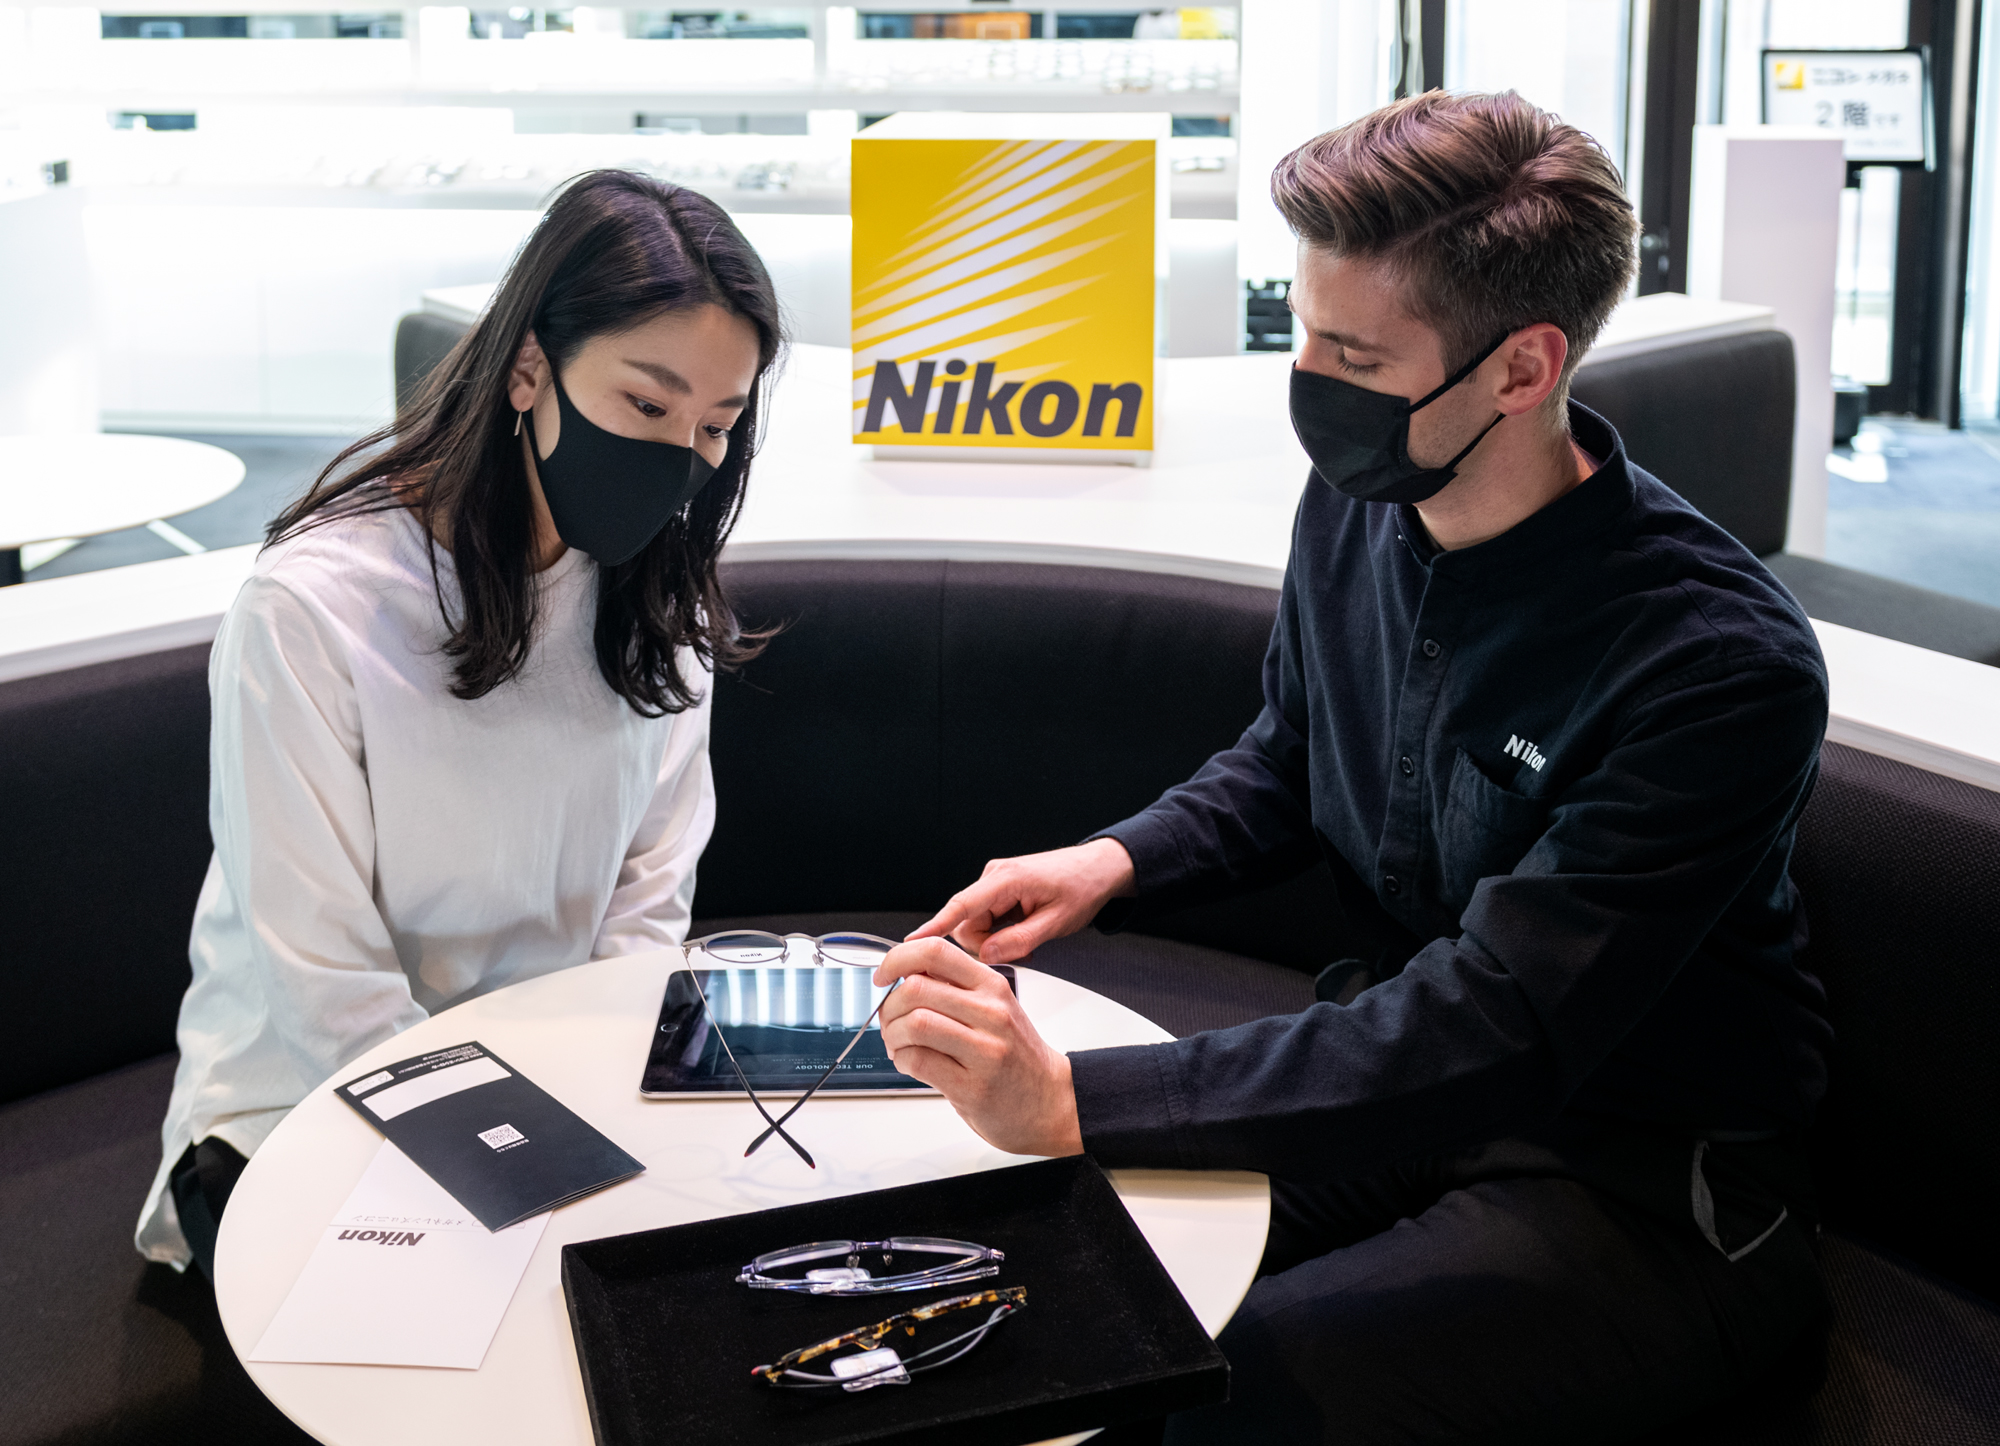 Nikon Optical USA Inc. and Anagram partner to put cash back in patients’ pockets